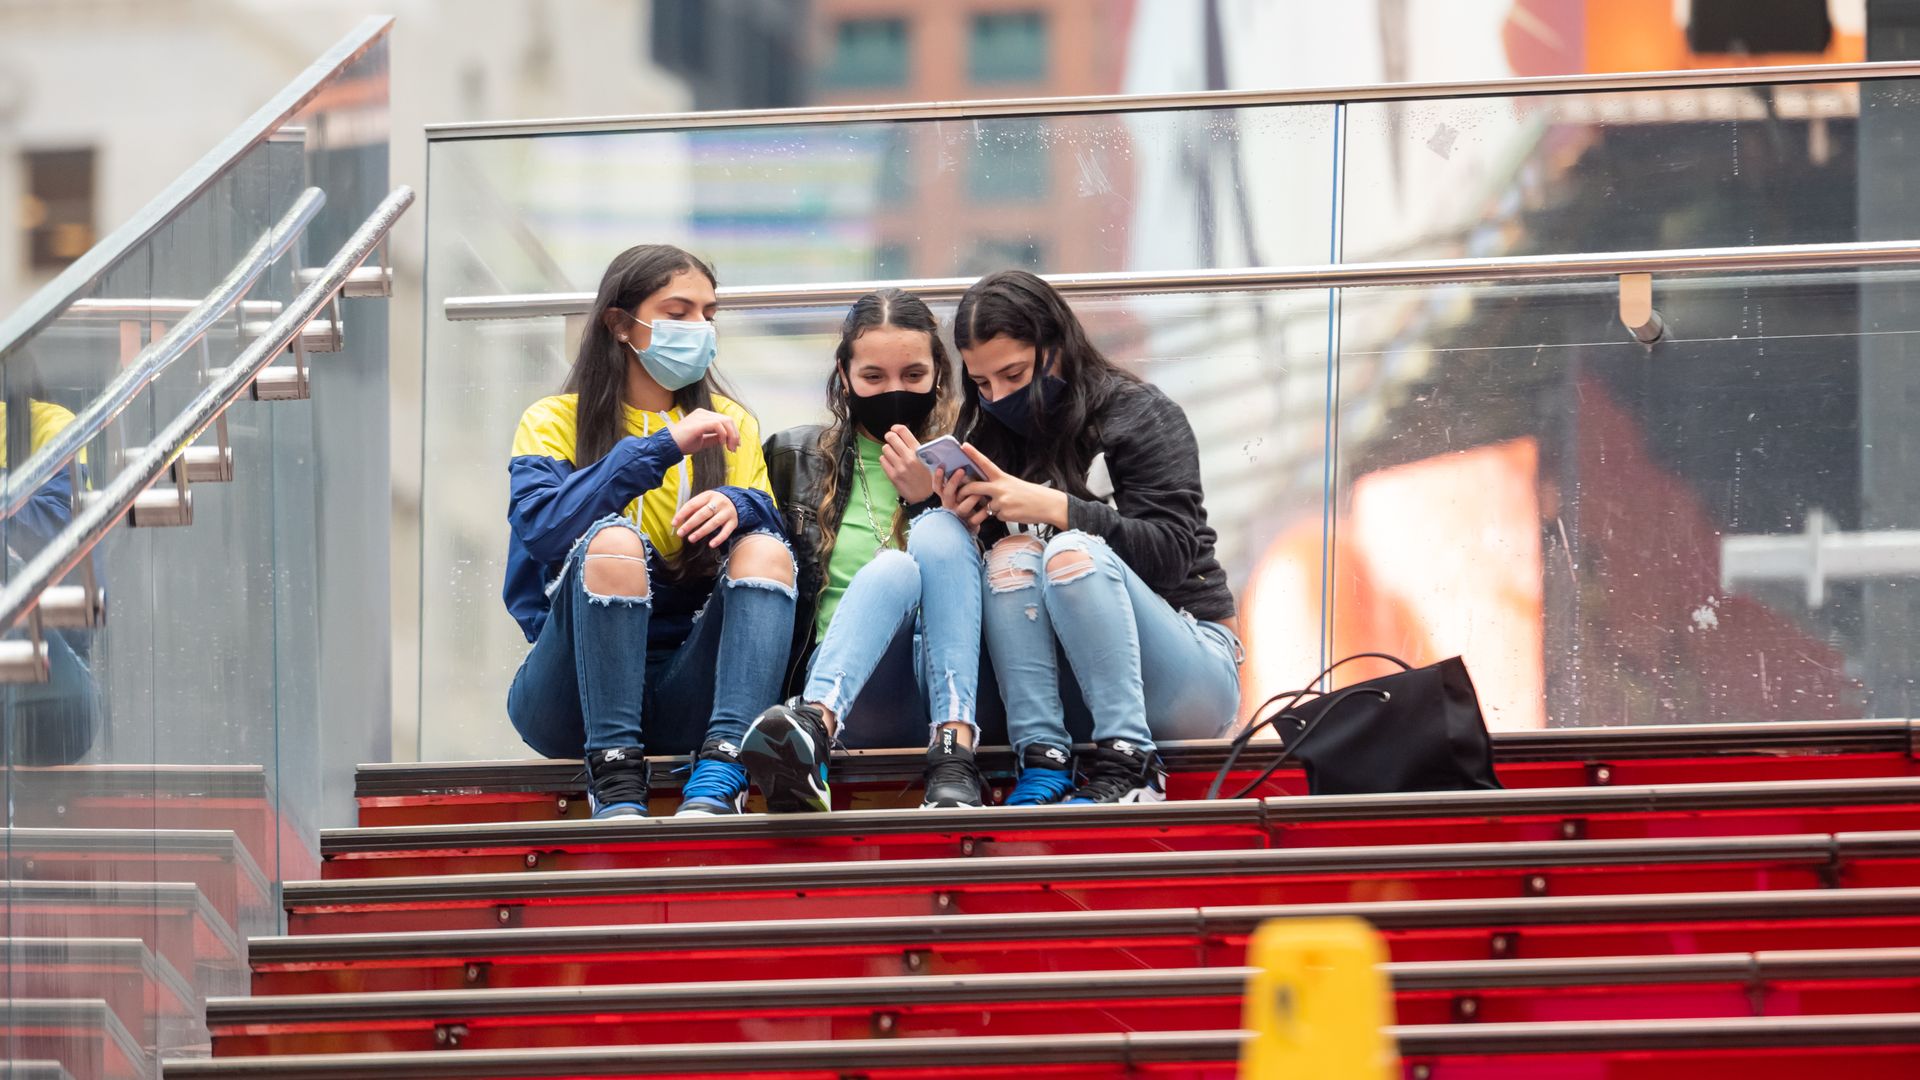 Young people looking at a phone in Times Square in New York City in October 2020.